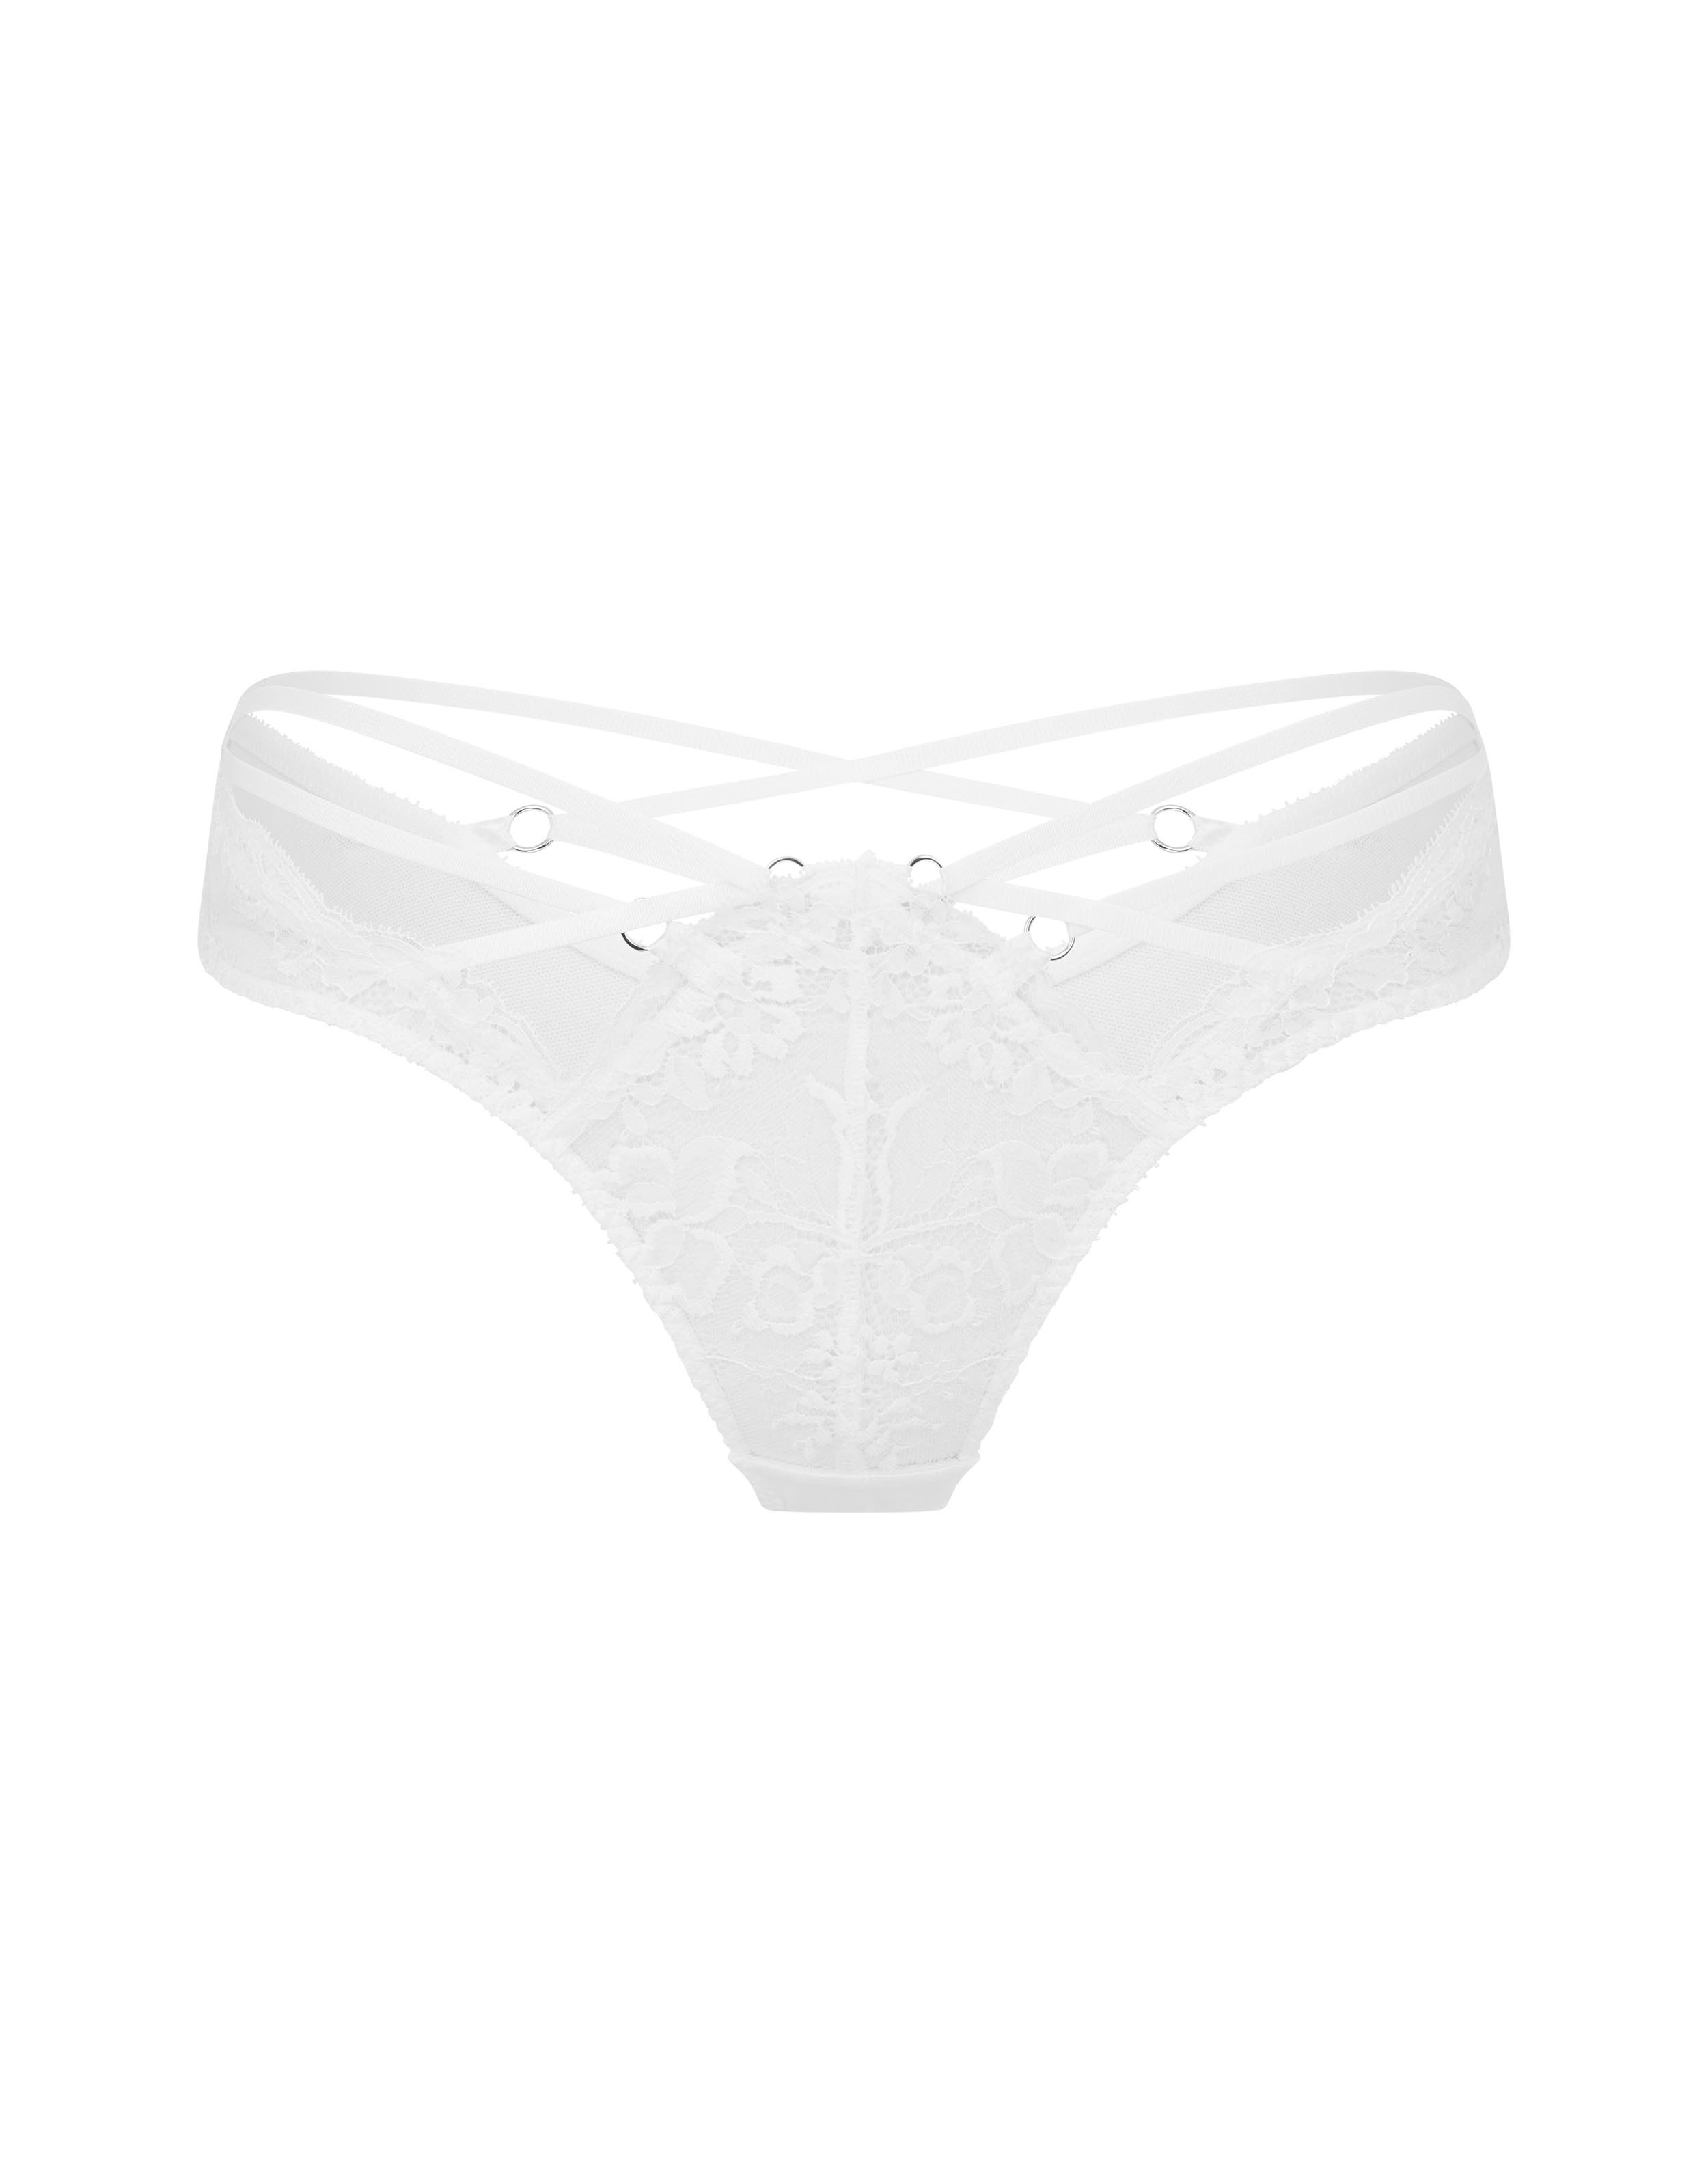 Essie Full Brief in White | Agent Provocateur Outlet